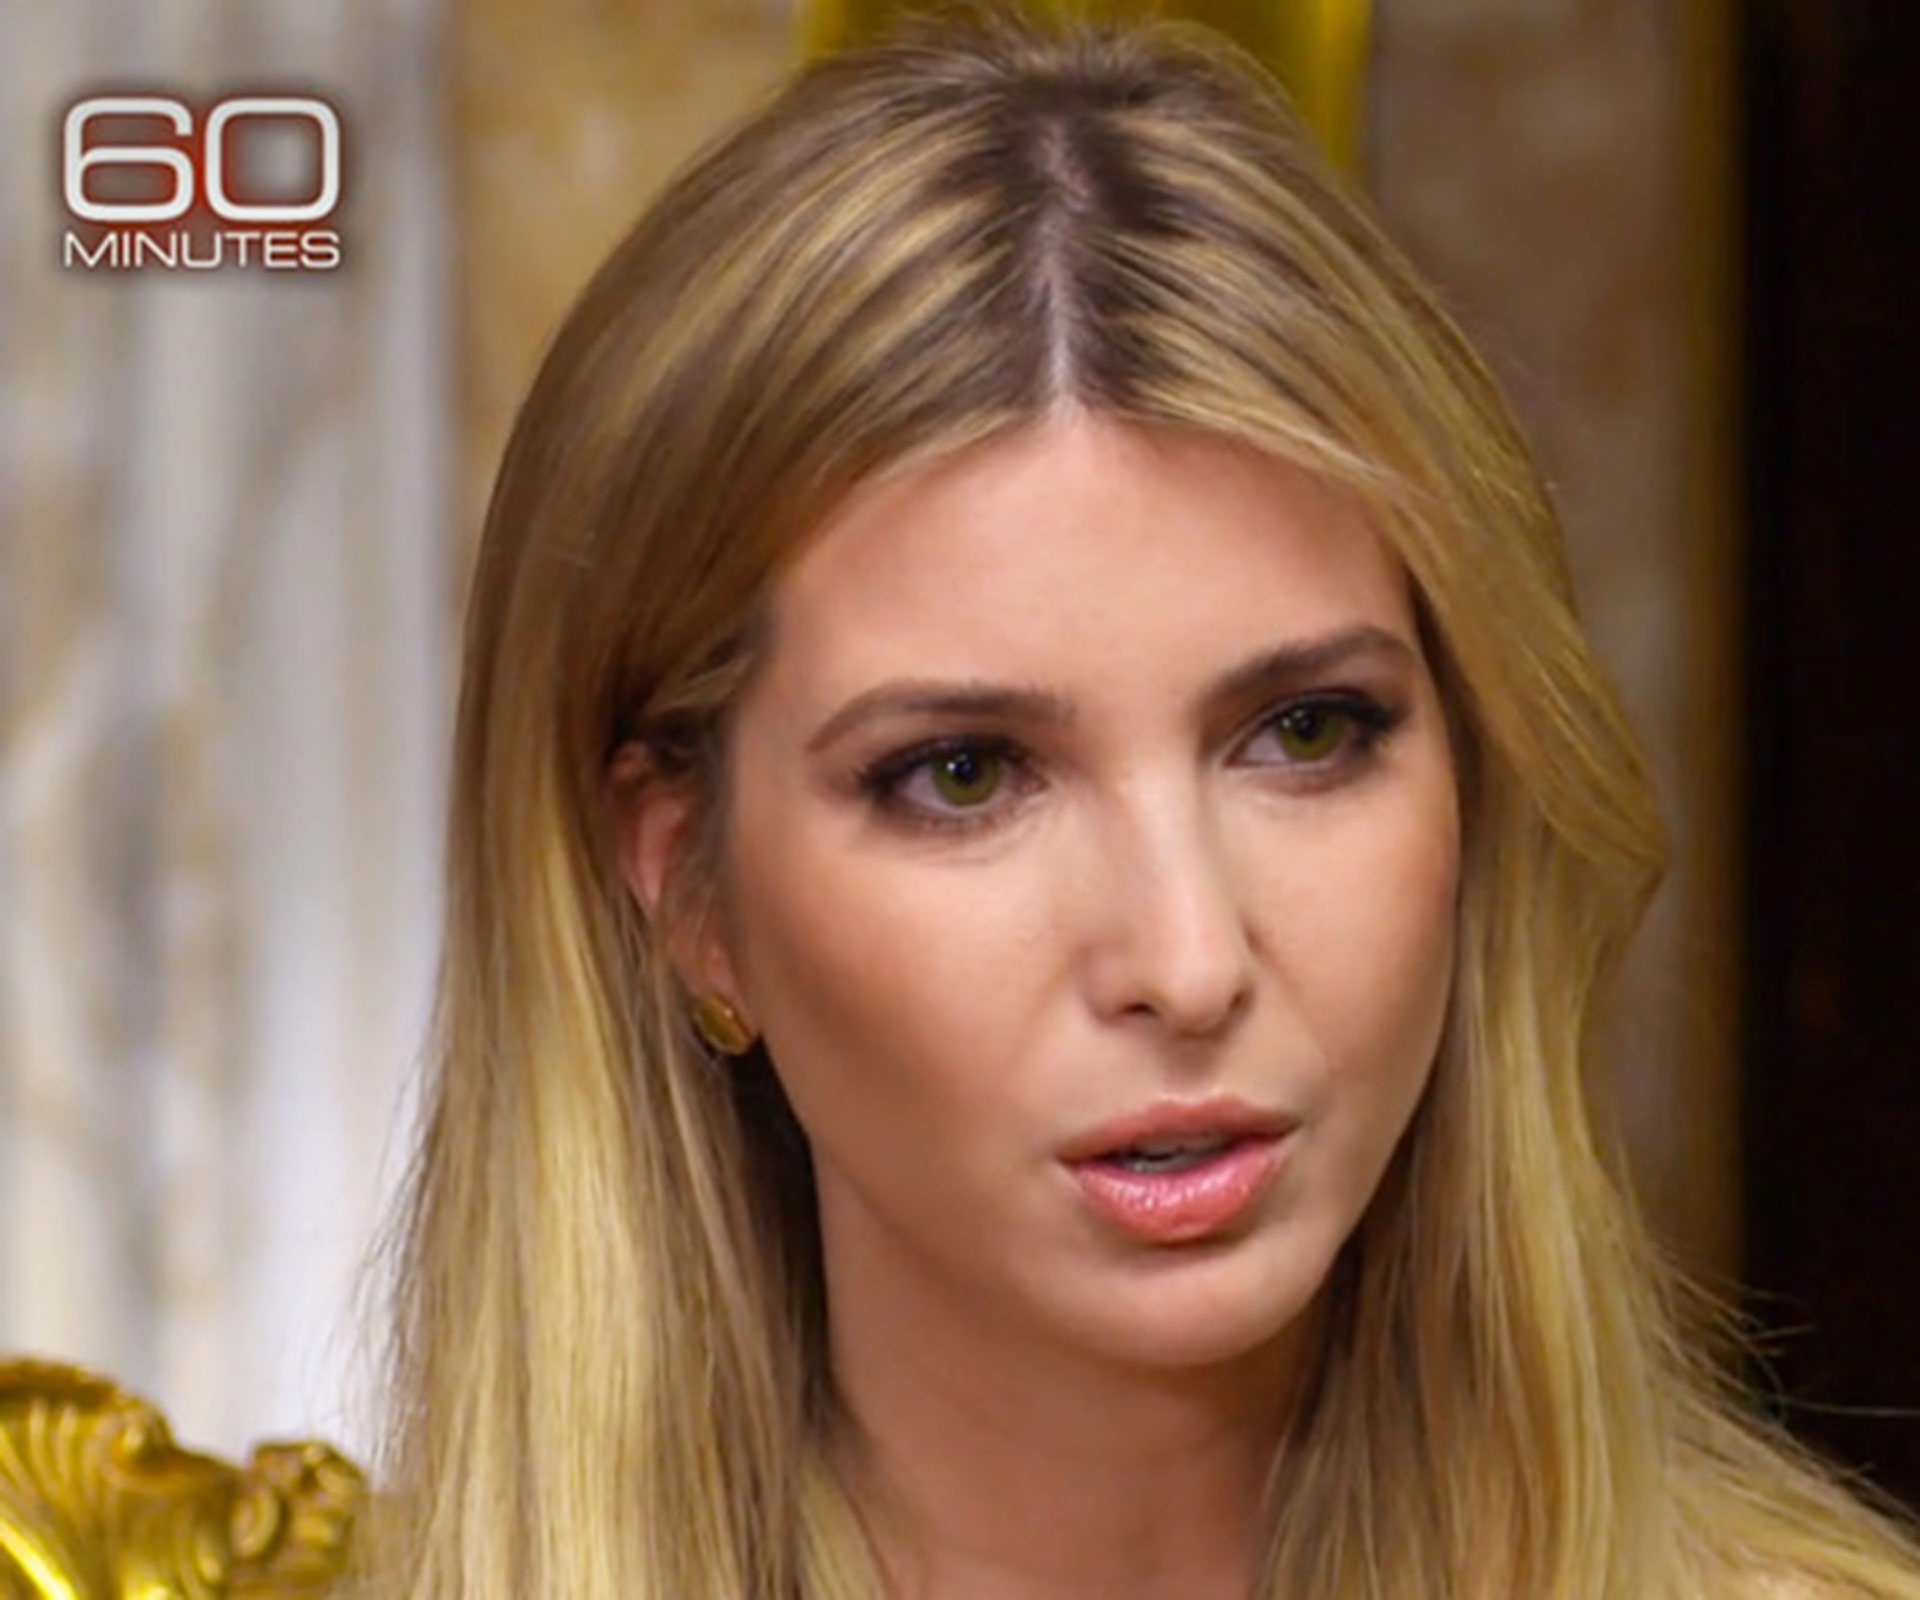 Outrage after Ivanka Trump’s company uses 60 Minutes interview to promote her luxury jewellery